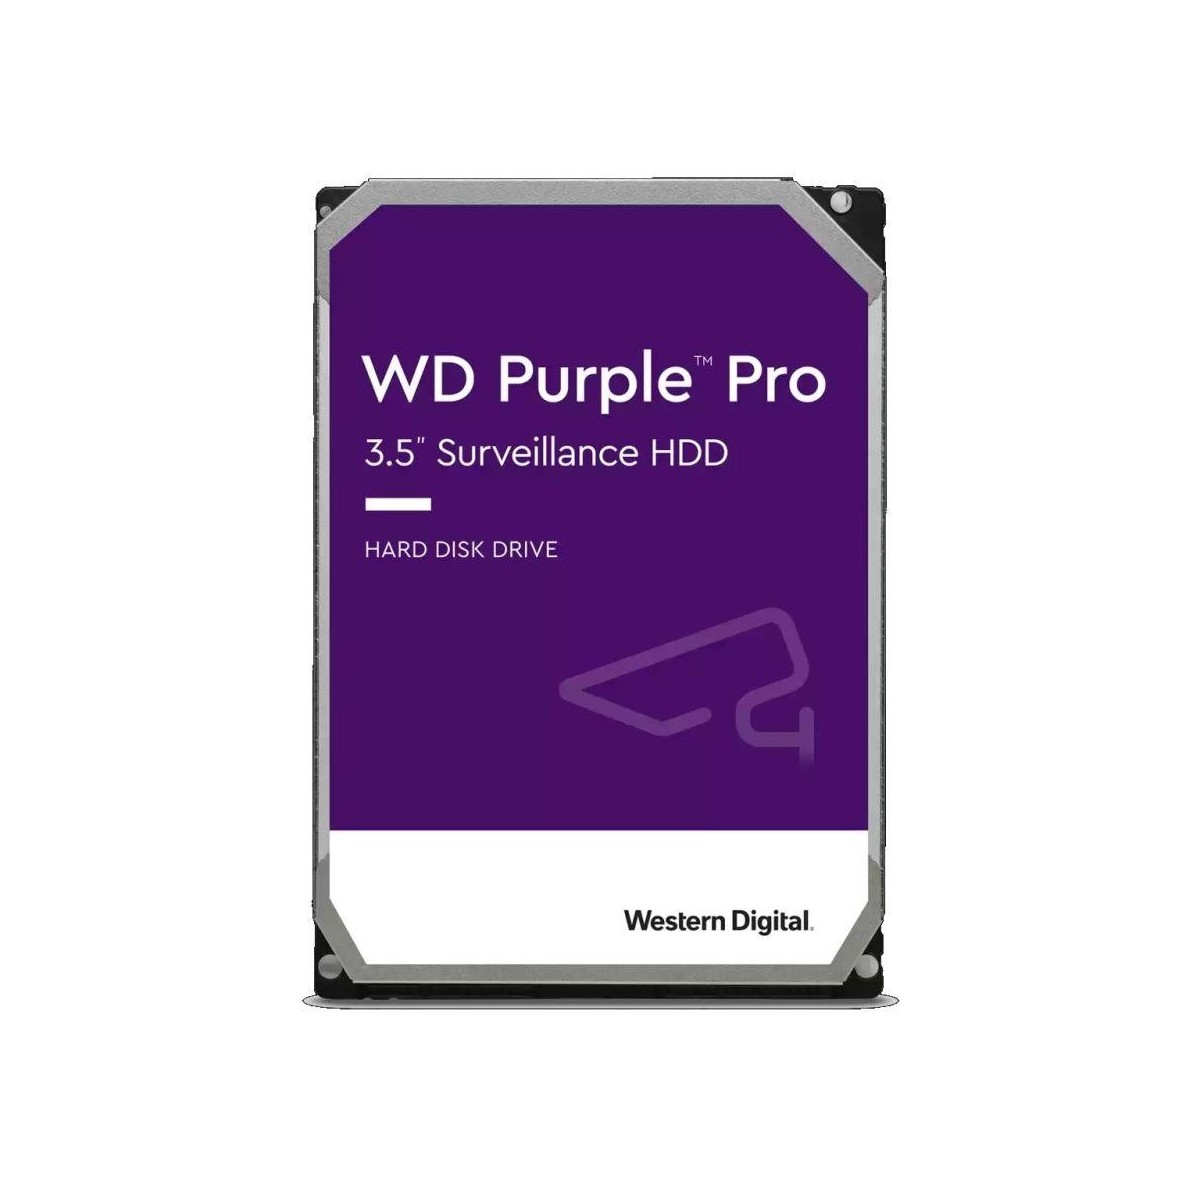 WD WD8002PURP 8,000 GB - Hdd